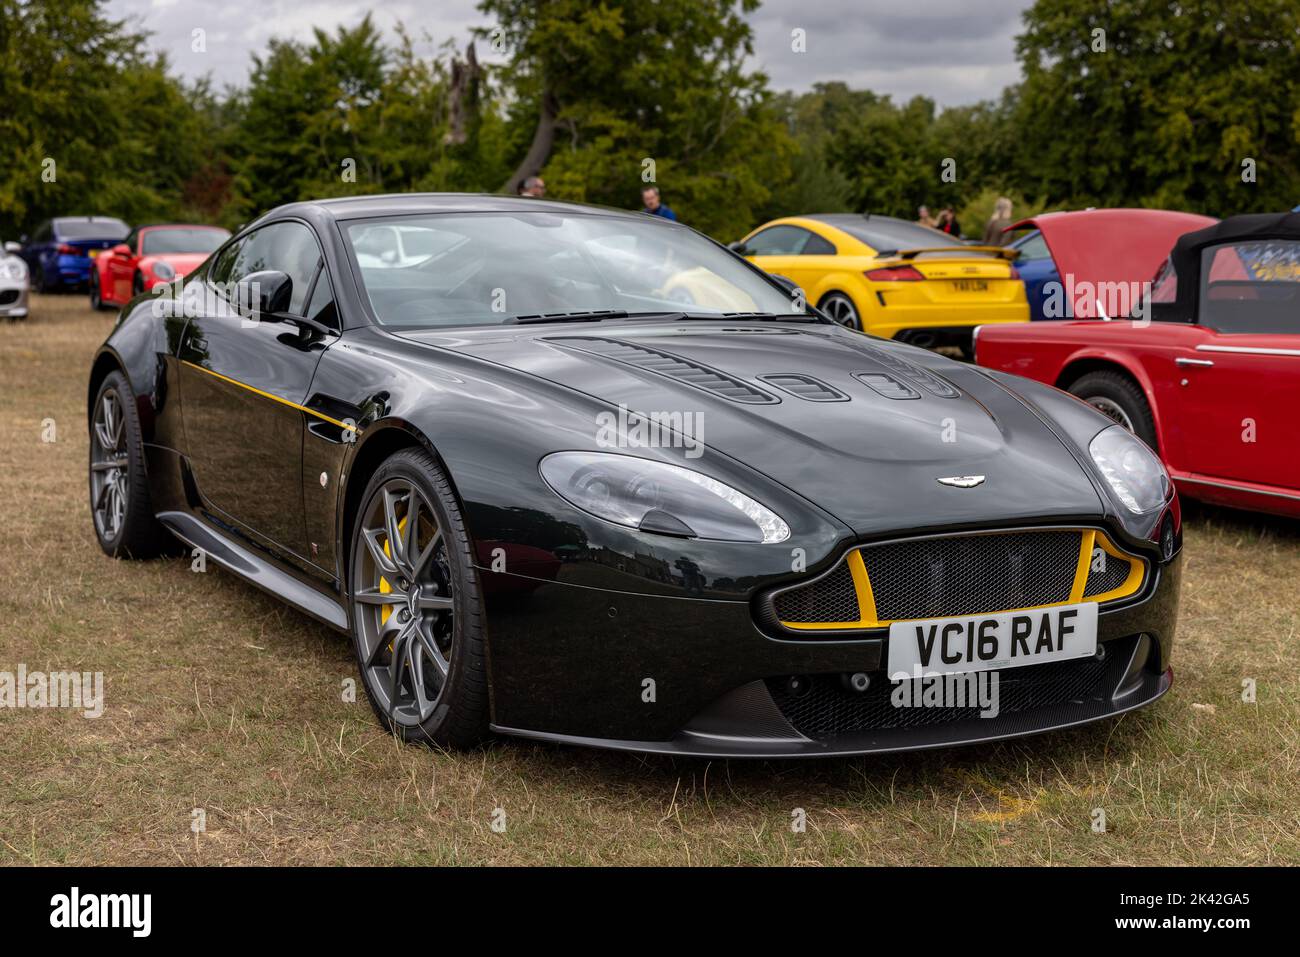 2016 Aston Martin V12 Vantage S, on display at the Salon Privé Concours d’Elégance motor show held at Blenheim Palace Stock Photo